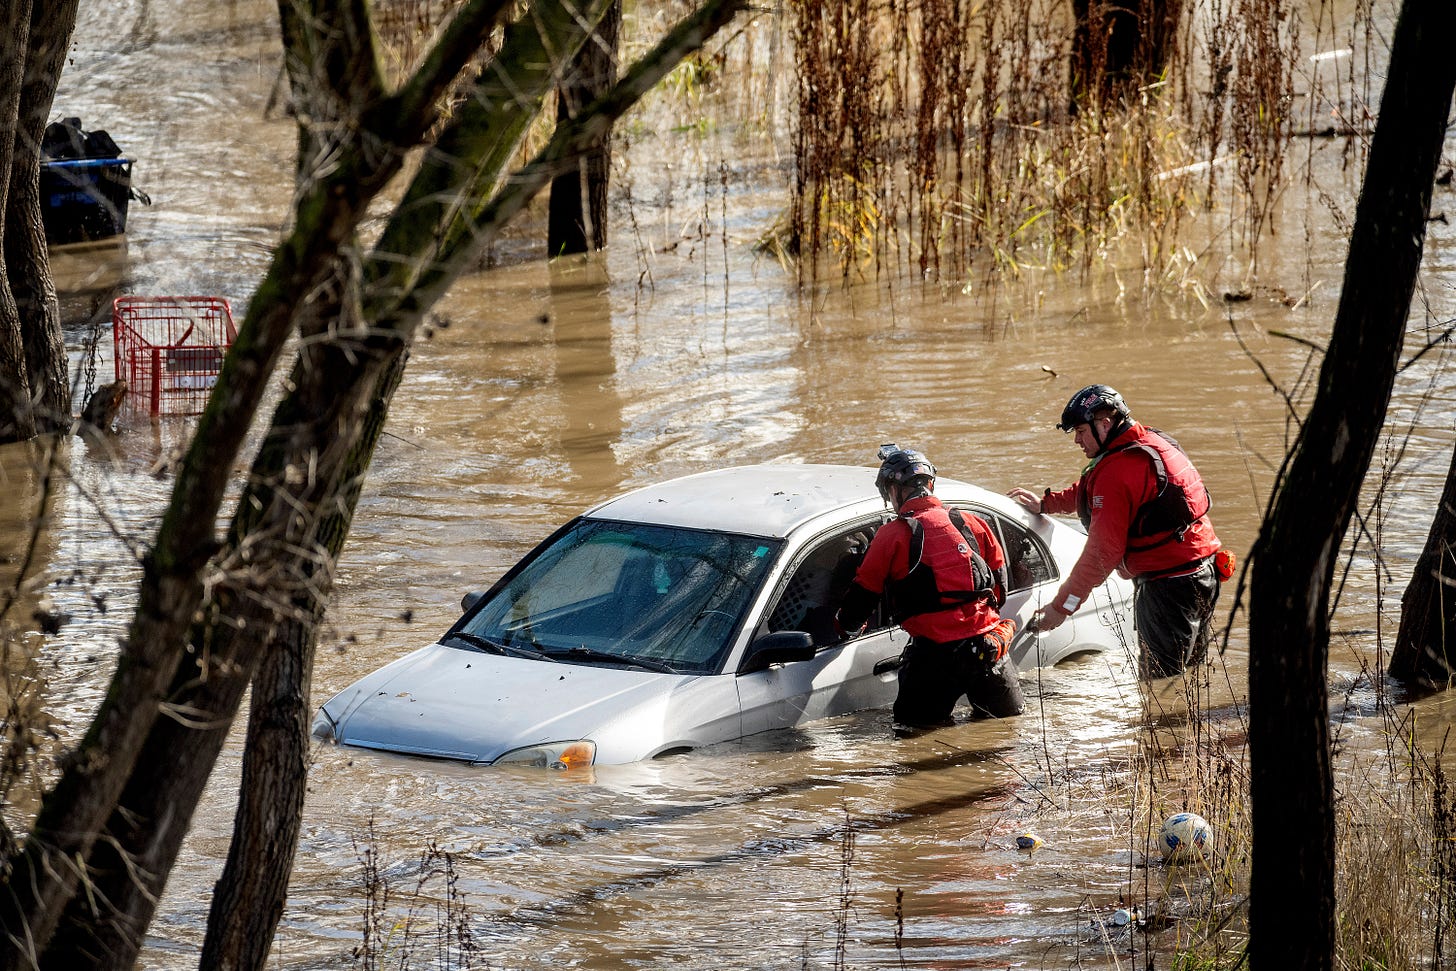 Two search and rescue workers stand by a gray sedan surrounded by floodwater.